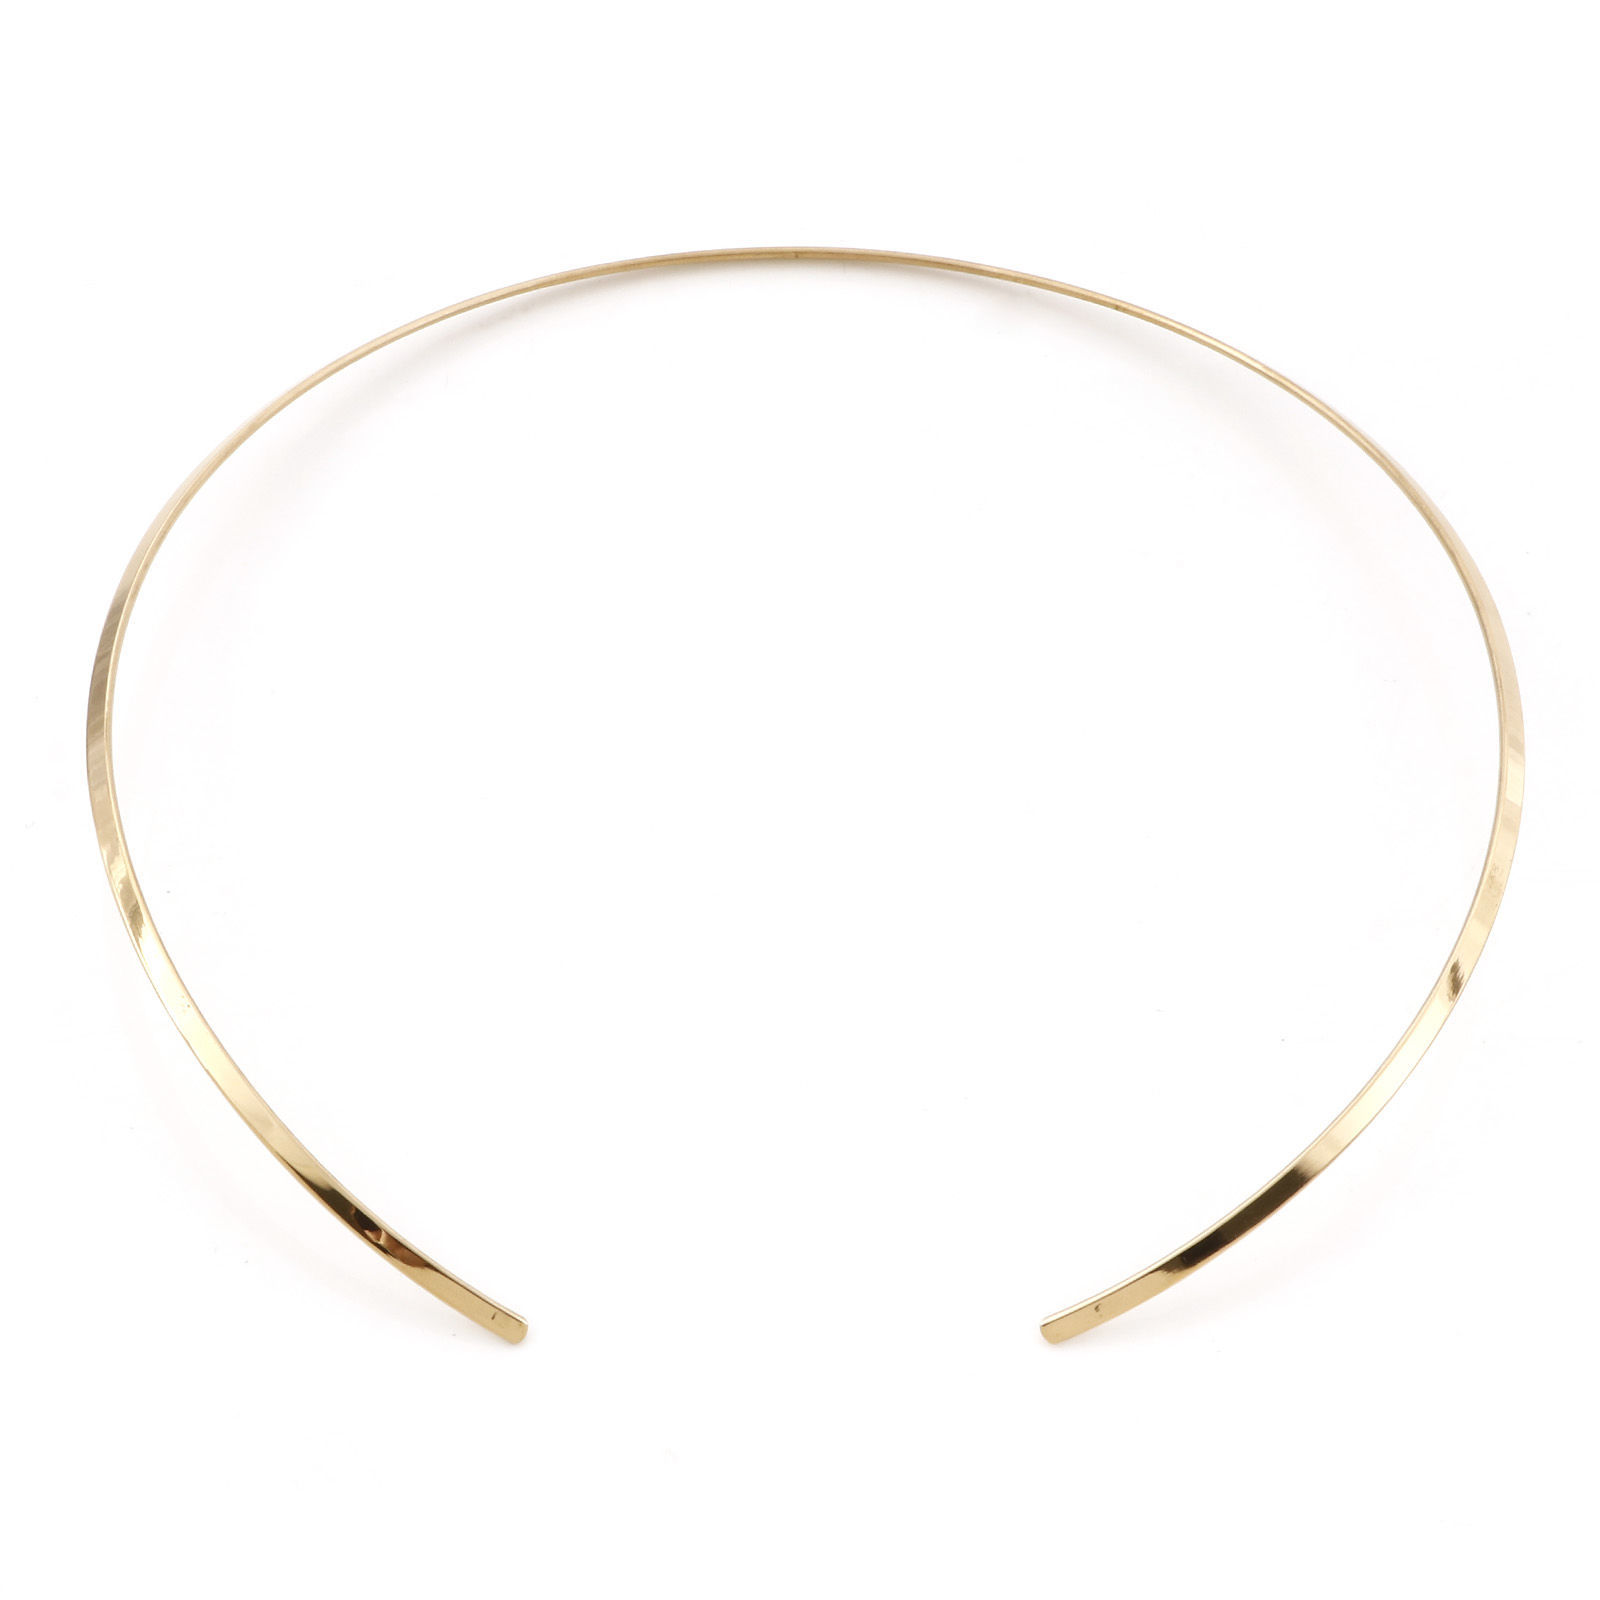 Picture of Eco-friendly 304 Stainless Steel Collar Neck Ring Necklace 18K Gold Color 41cm(16 1/8") long, 1 Piece